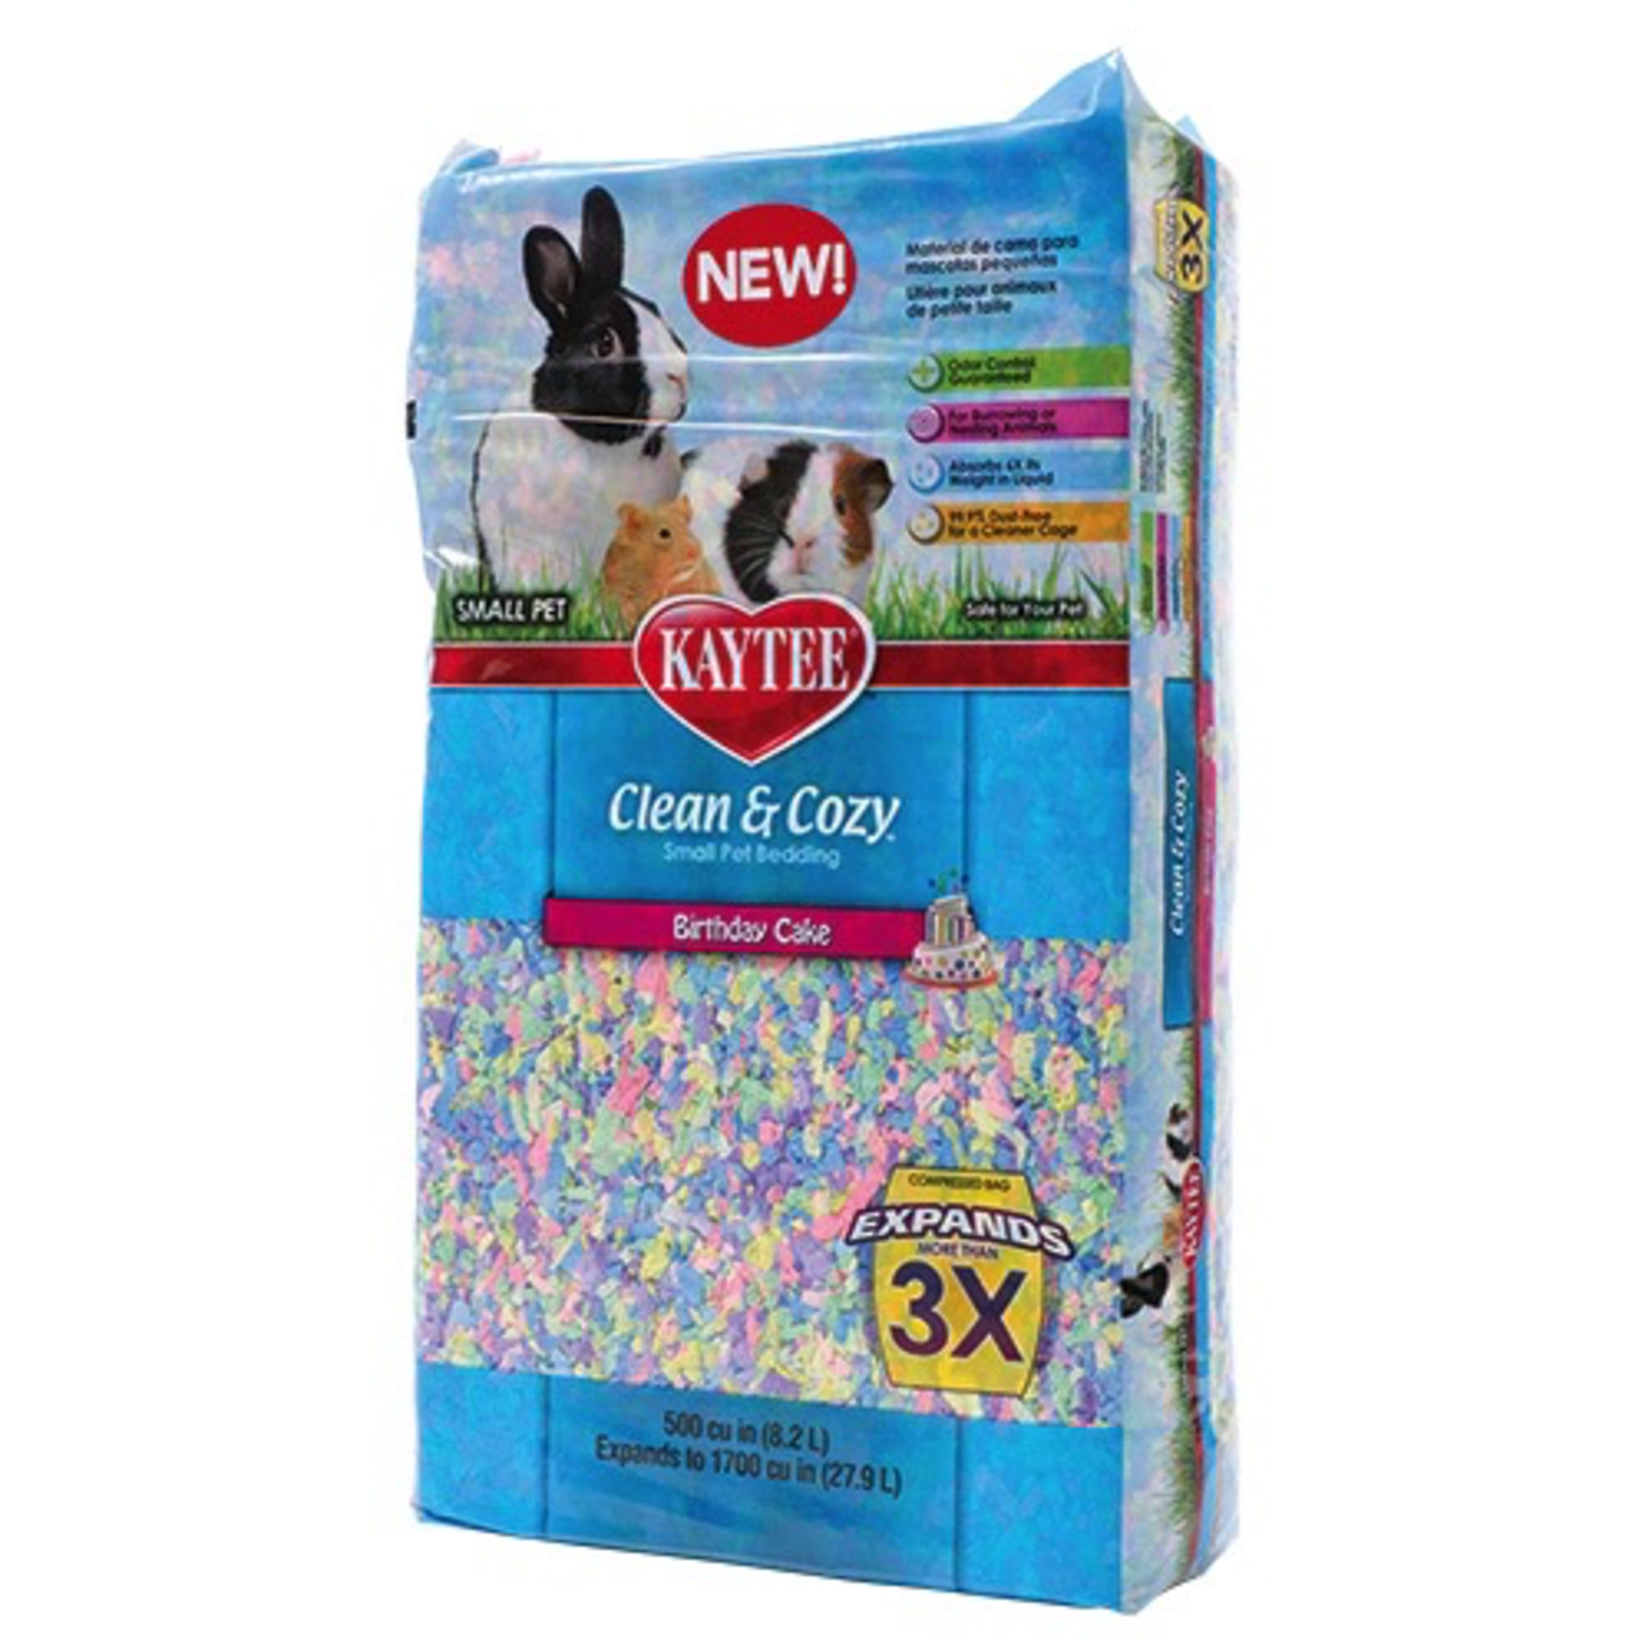 KAYTEE (W) Clean and Cozy Small Pet Bedding - 500 cu in - Birthday Cake